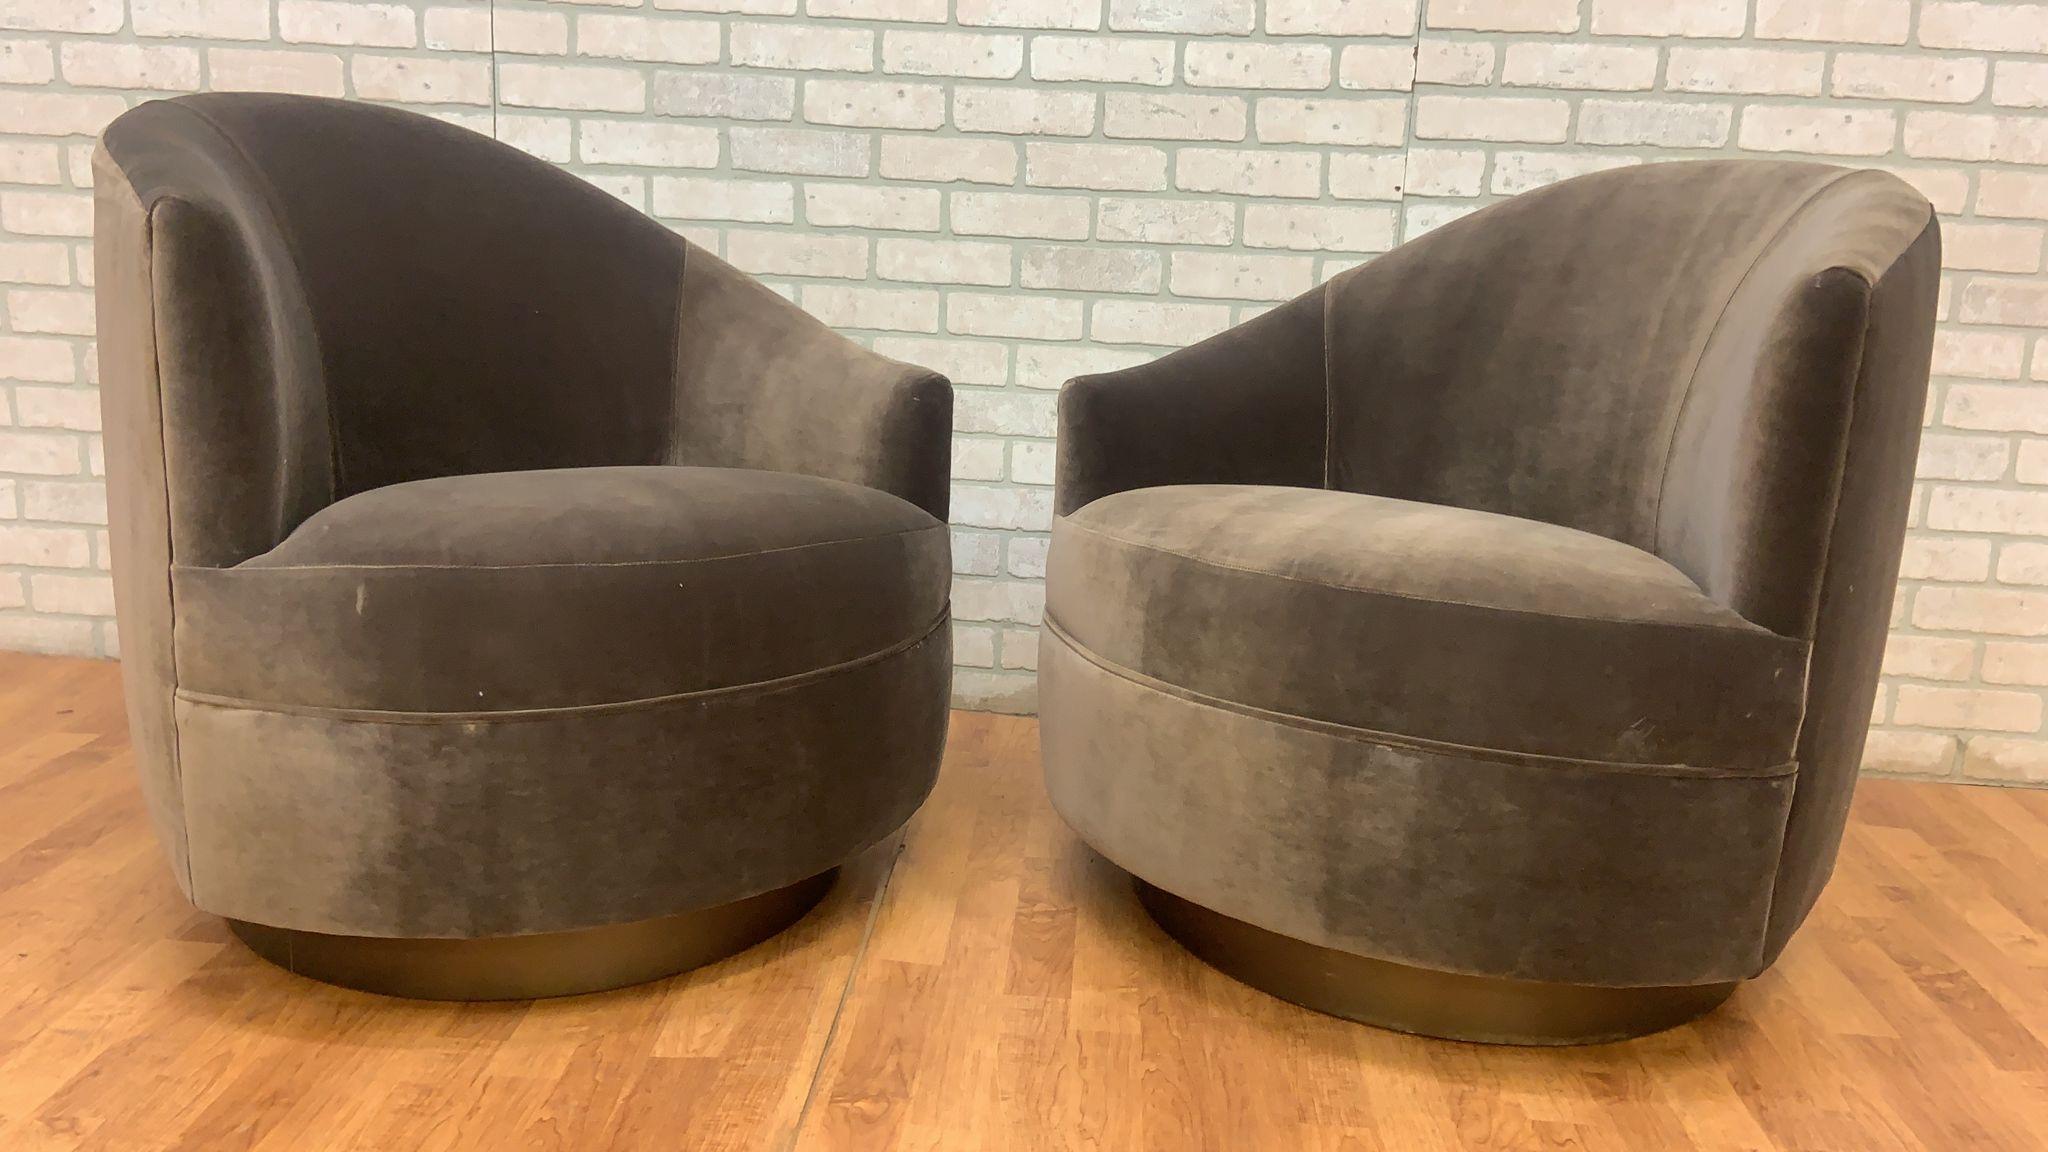 Post Modern Asymmetrical Barrel Back Swivel Chairs Newly Reupholstered in Grey Velvet on a Bronze Base

The Post Modern Asymmetrical Barrel Back Swivel Chairs are a stunning pair of chairs that showcase the essence of post-modern design. Their